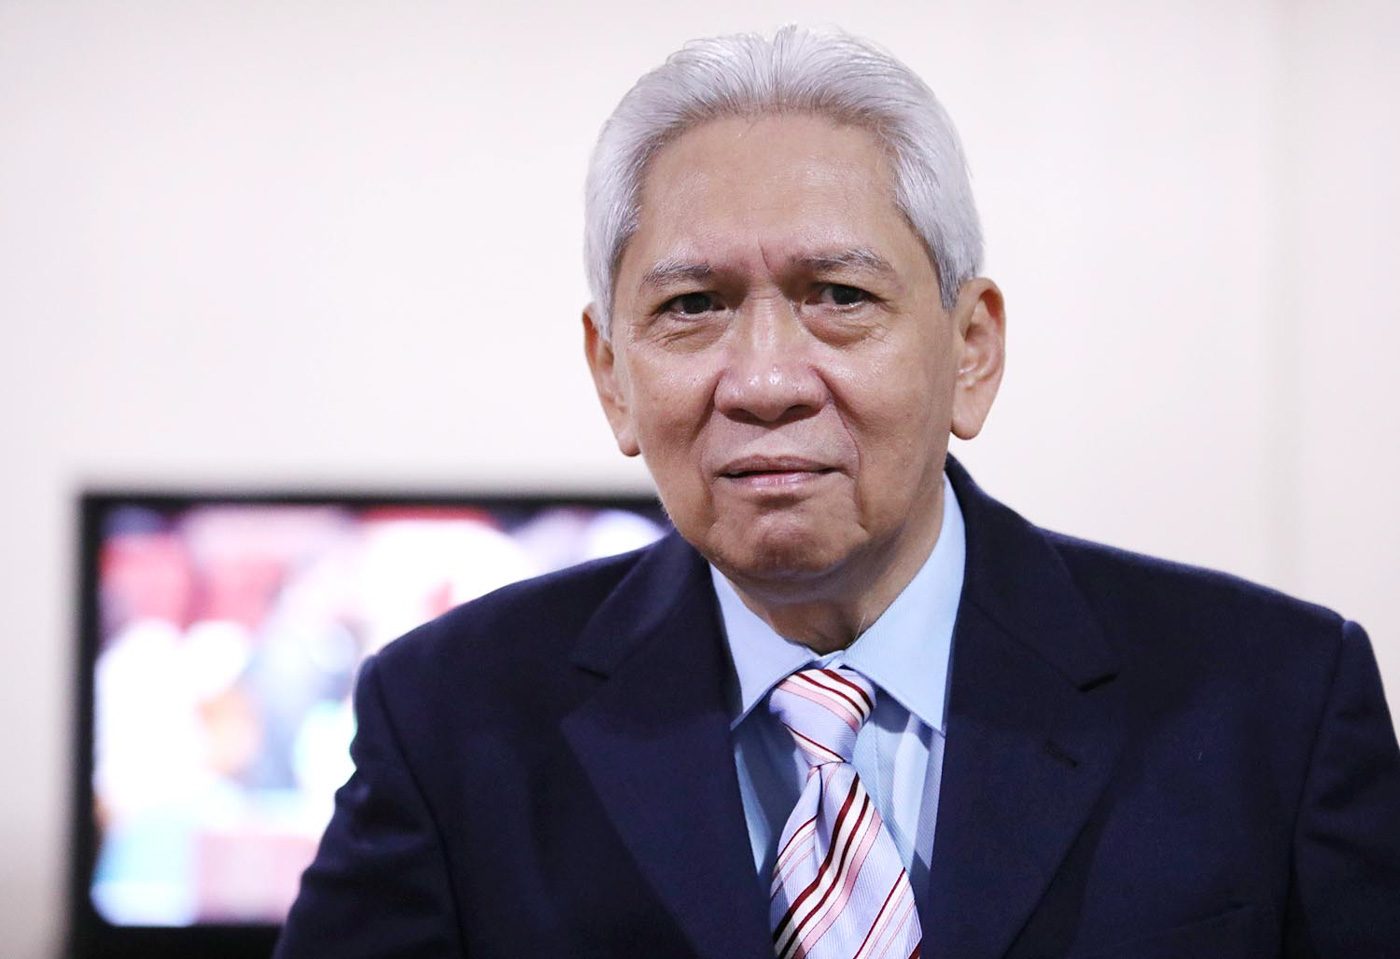 Martires: Accusations vs Acosta will be ‘judiciously scrutinized’